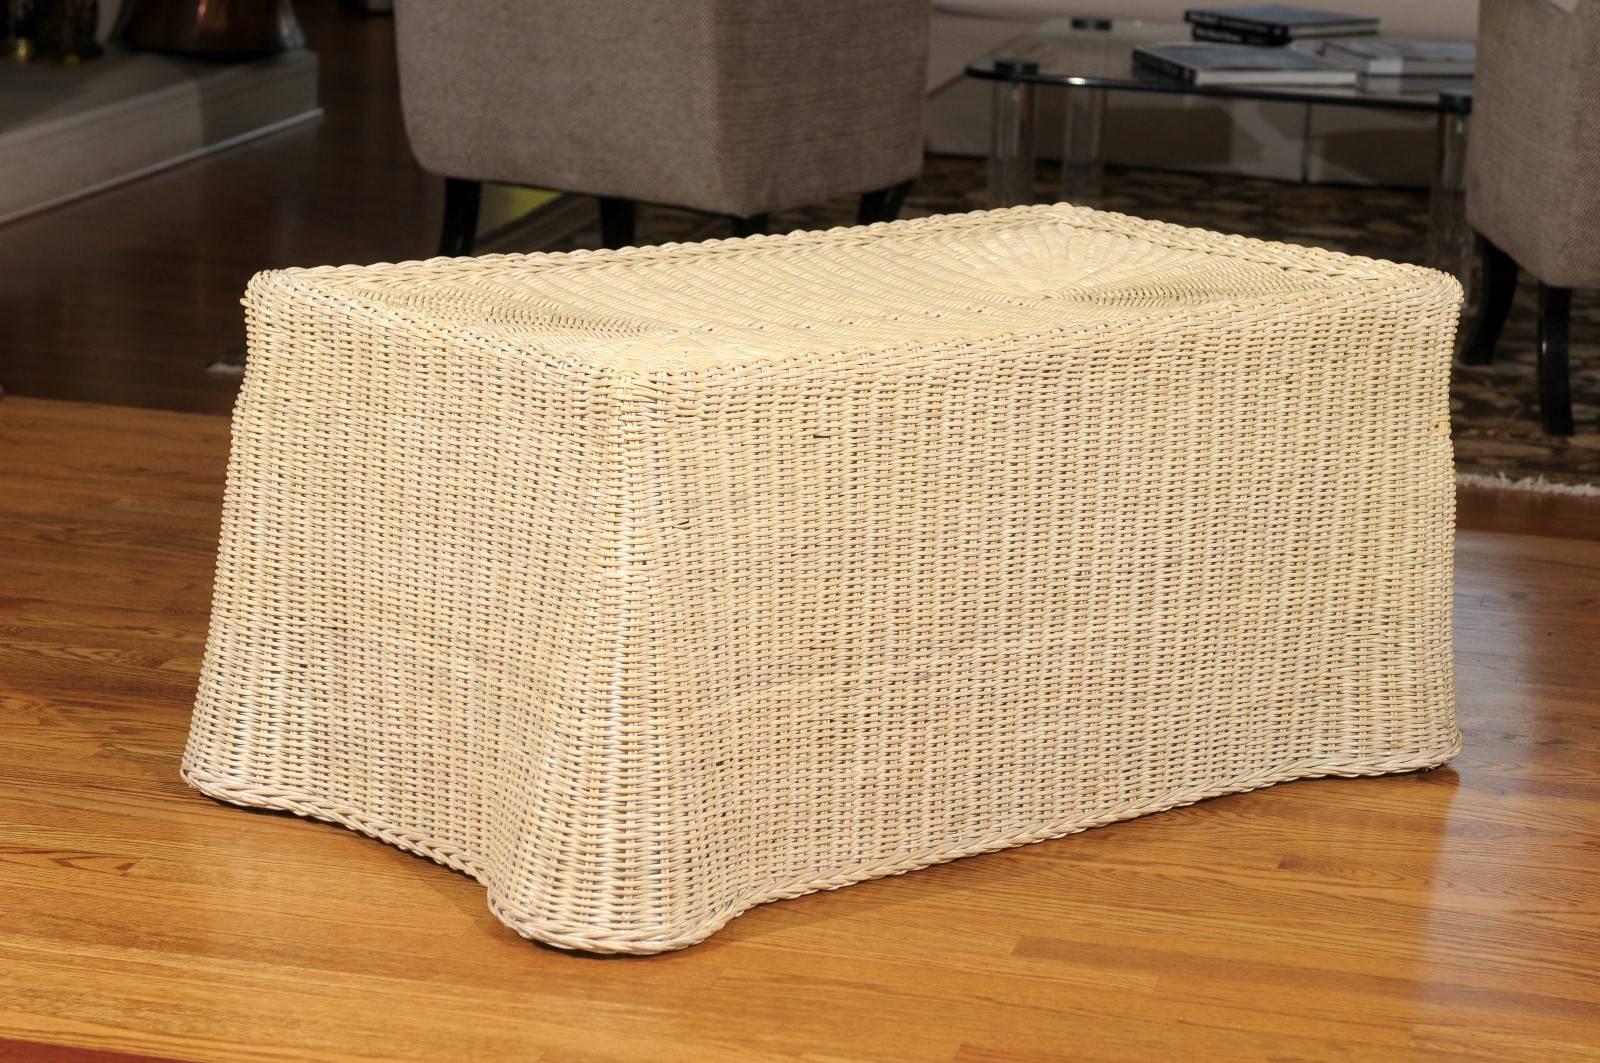 A fabulous glaze vintage wicker coffee table, circa 1970. A beautifully conceived and executed design, the wicker is woven to create a table drape effect. Hardwood frame beneath add strength and stability. This dramatic piece is a wonderful way to